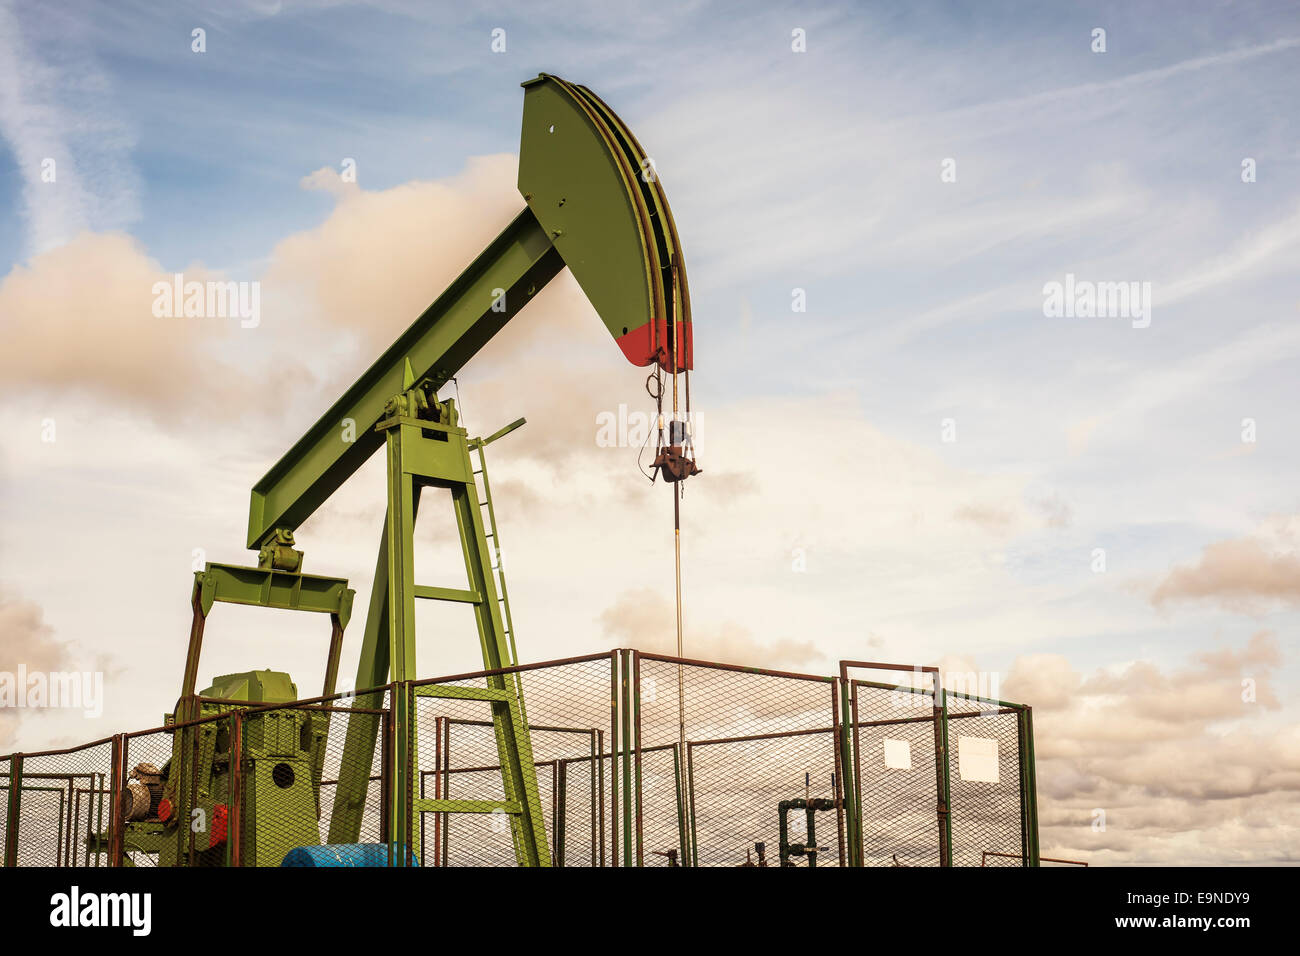 oil rig pumping on cloudy sky background Stock Photo